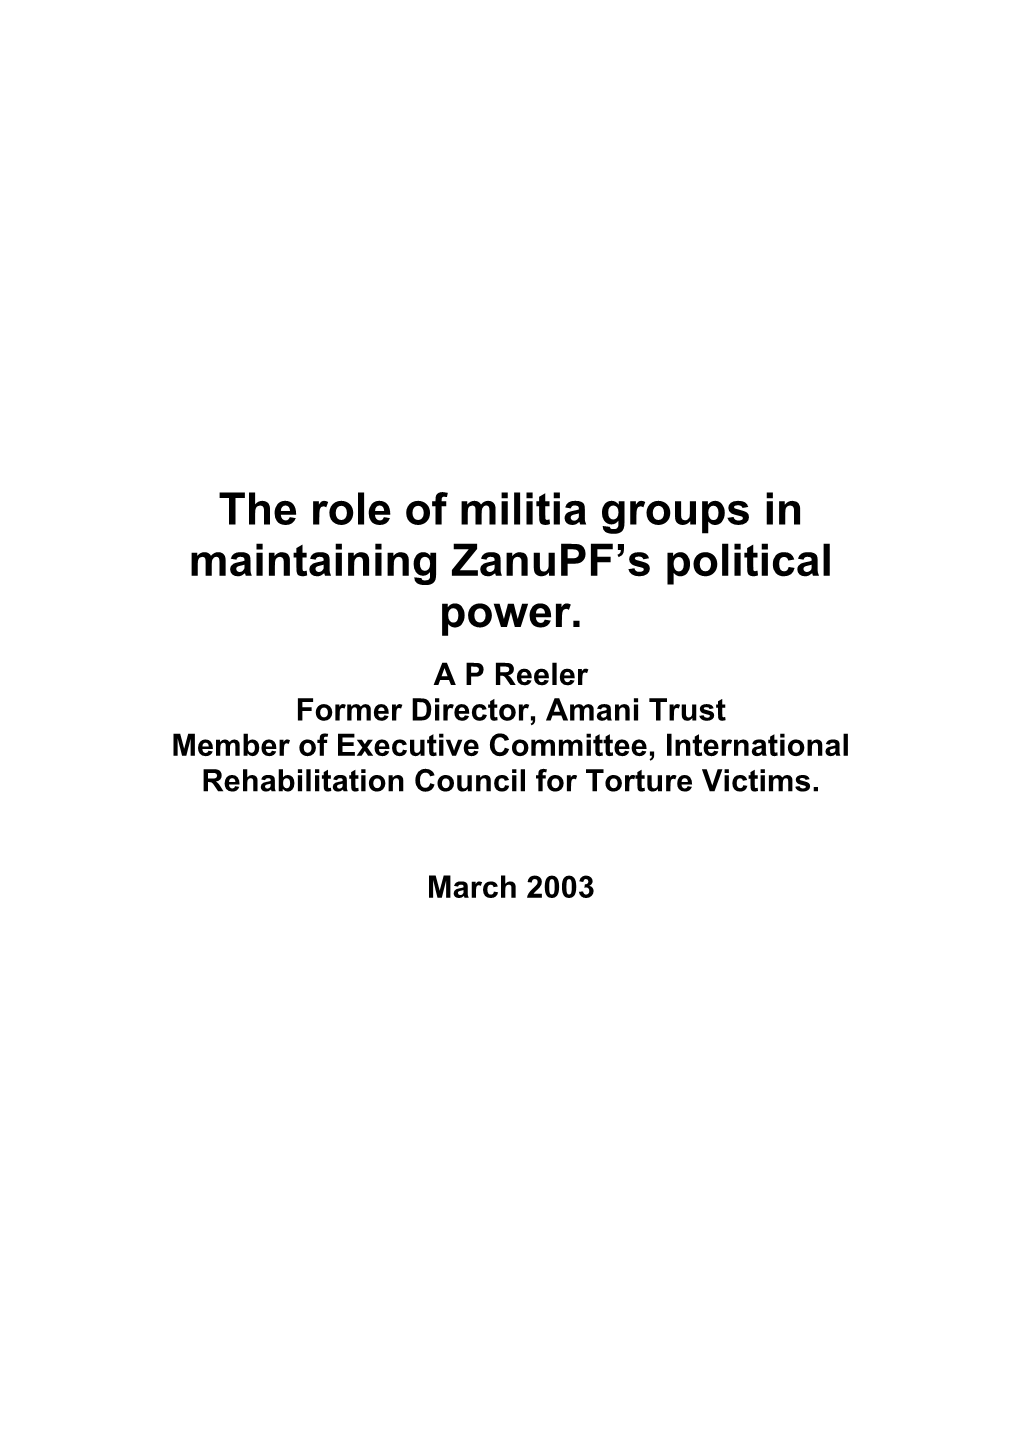 The Role of Militia Groups in Maintaining Zanupf's Political Power